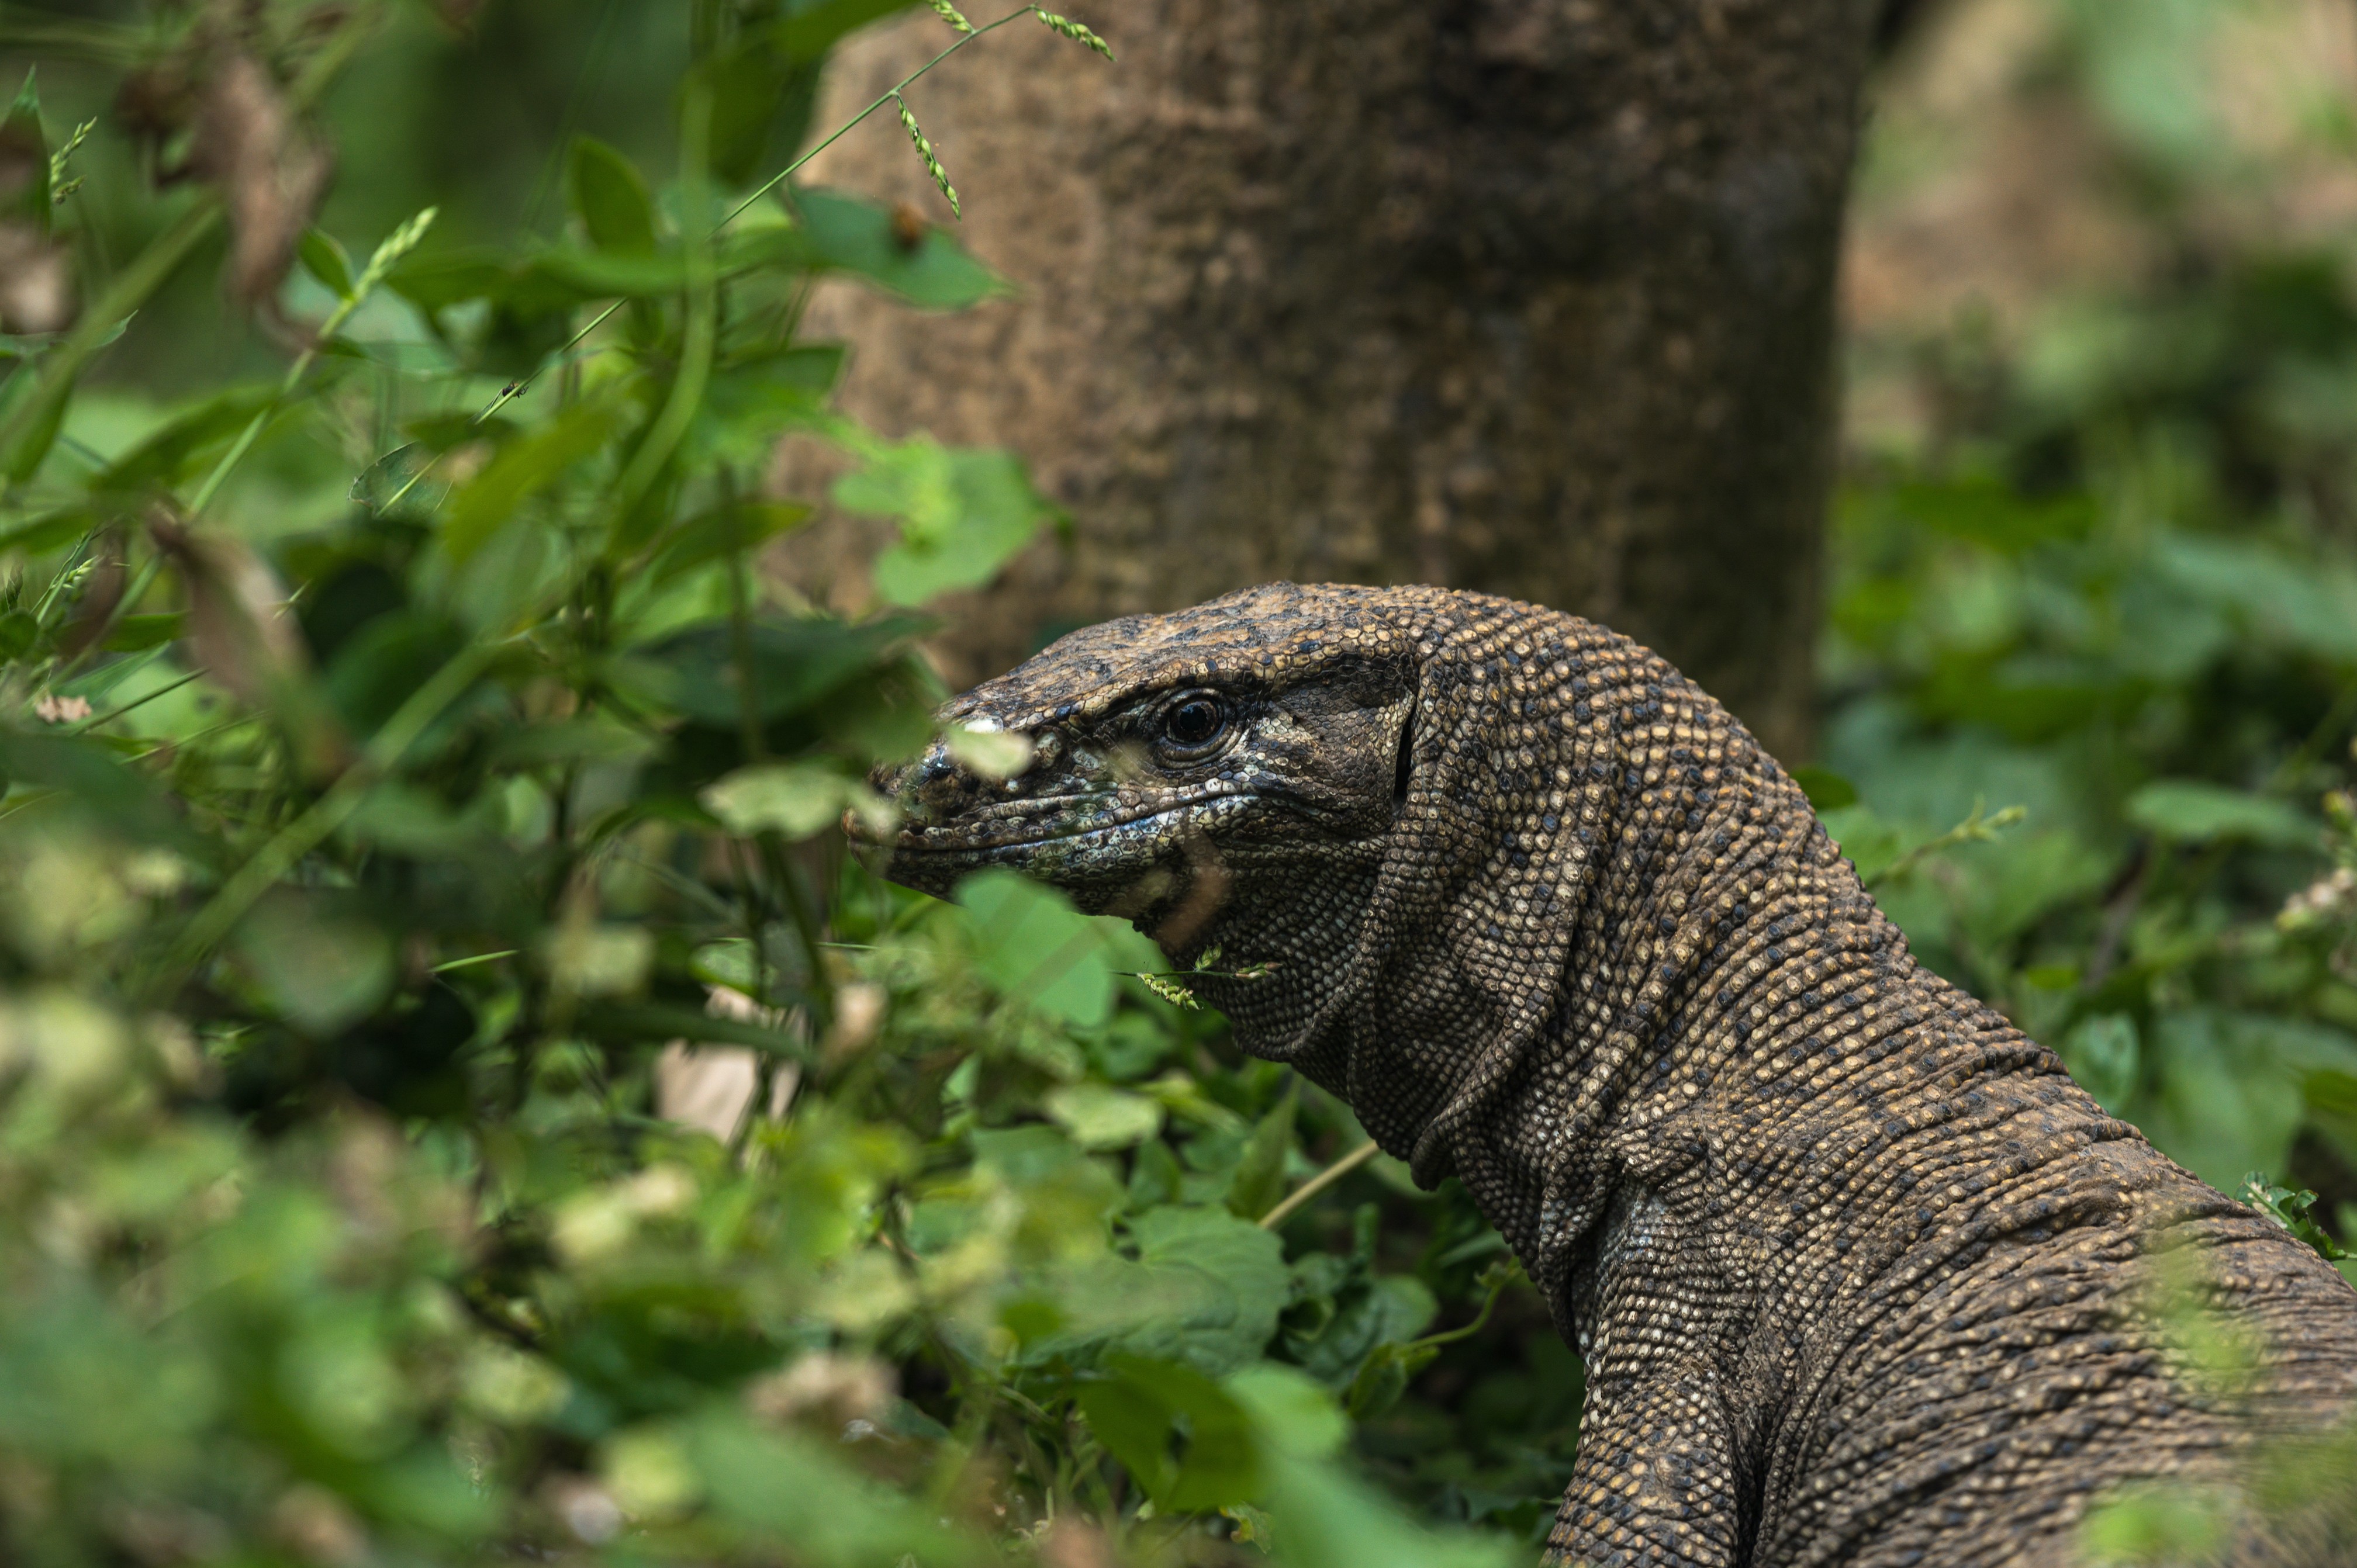 2012px x 2683px - 4 Men Gang Raped a Protected Monitor Lizard. Experts Explain Why.